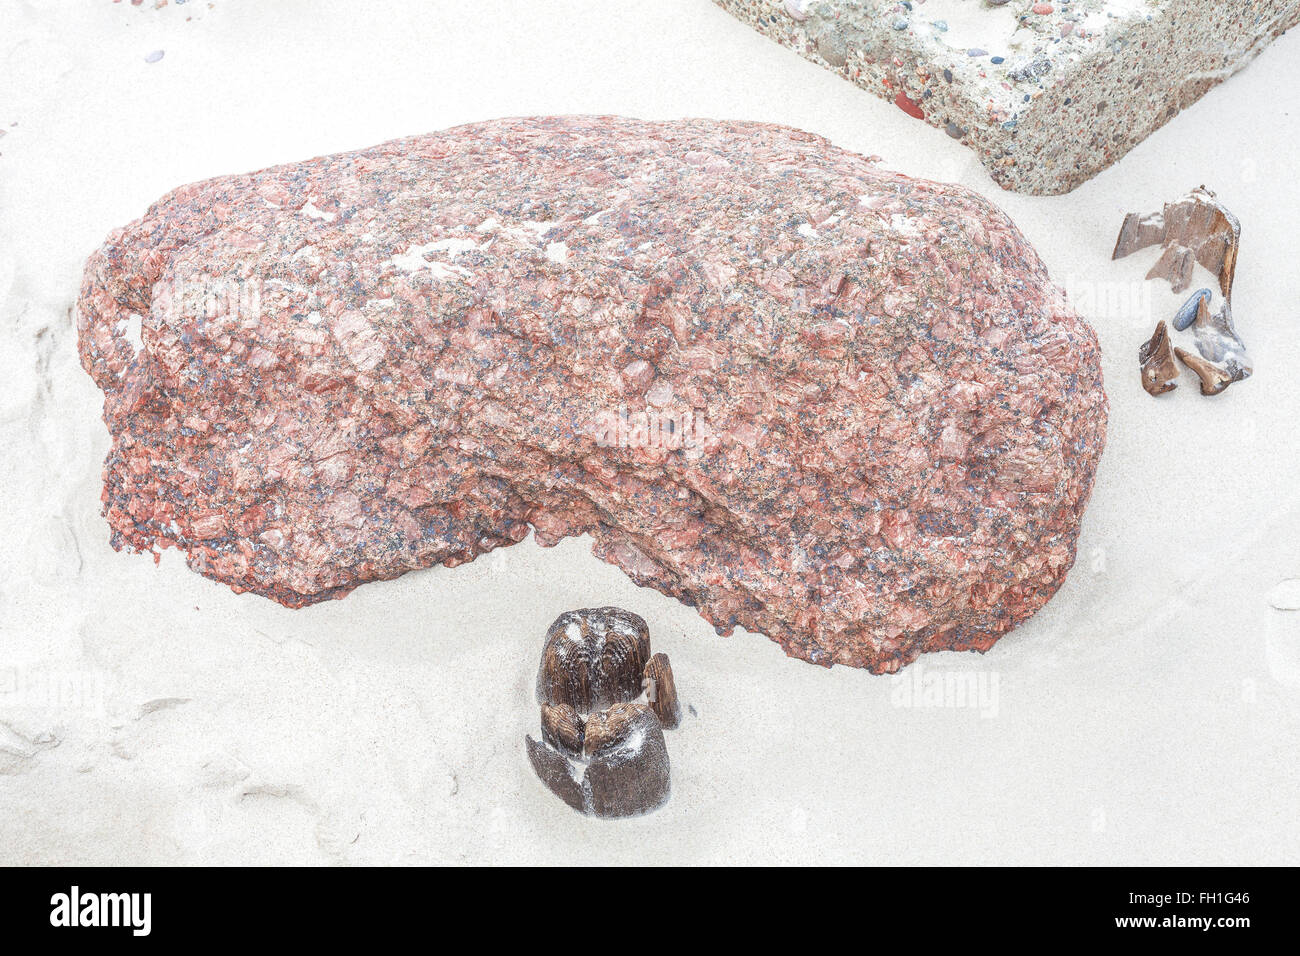 Wood and rock on sand, abstract nature background. Stock Photo